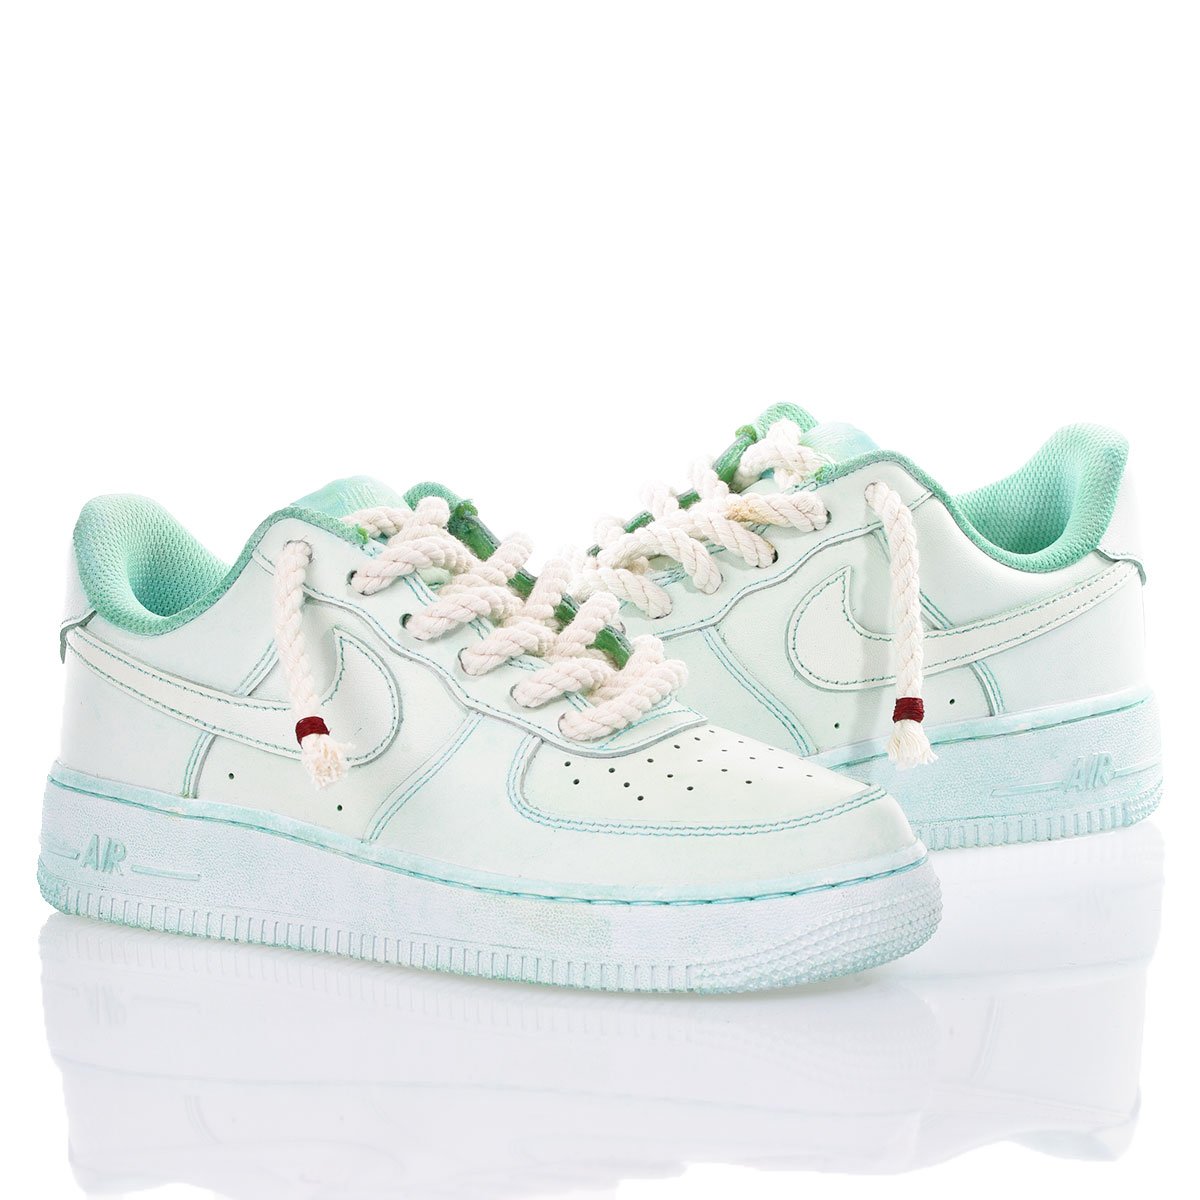 Nike Air Force 1 Dye Malachite Air Force 1 Washed-out